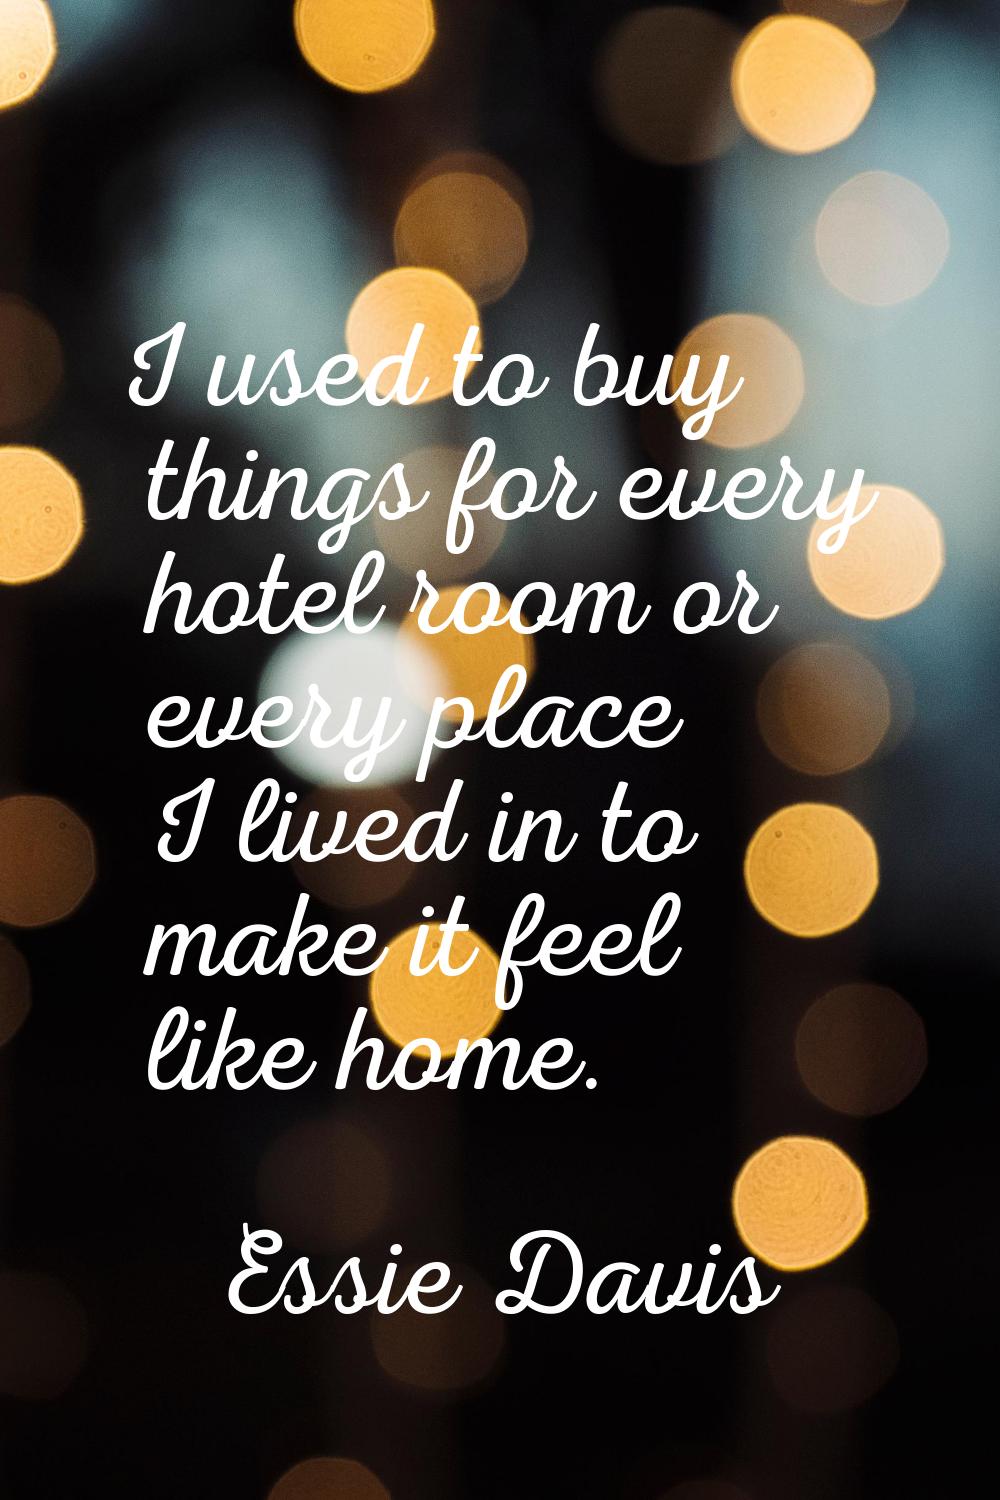 I used to buy things for every hotel room or every place I lived in to make it feel like home.